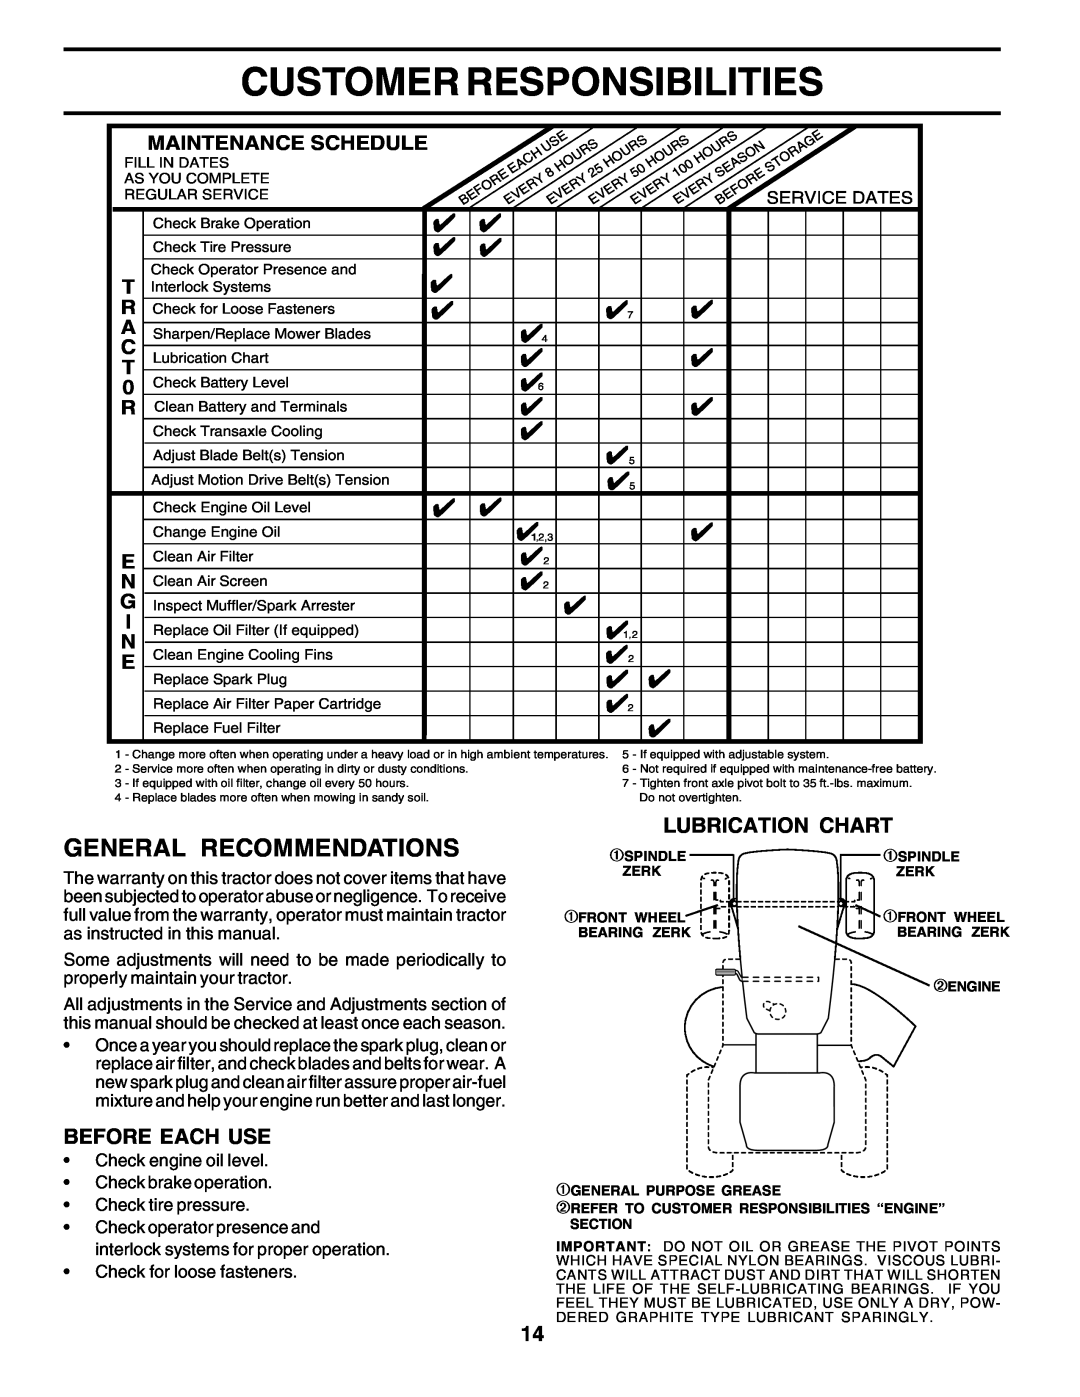 Poulan PO14542D manual Customer Responsibilities, General Recommendations, Before Each Use, Lubrication Chart 